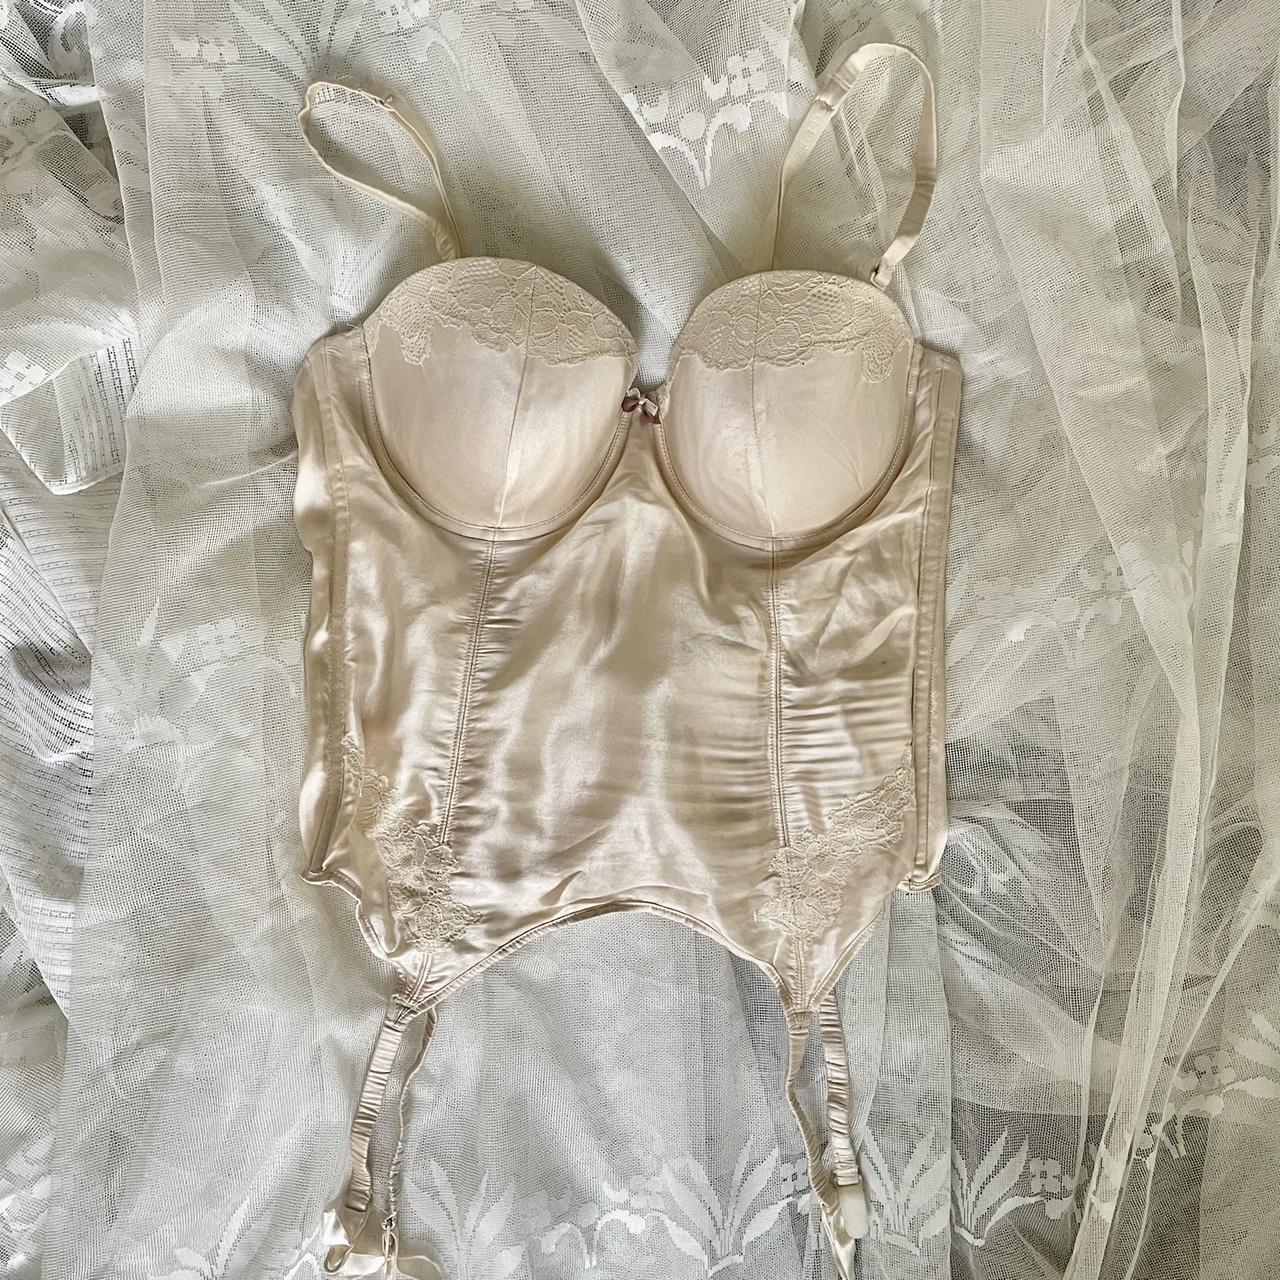 Marks & Spencer corset lace top 32D cup size, 4 row - Depop